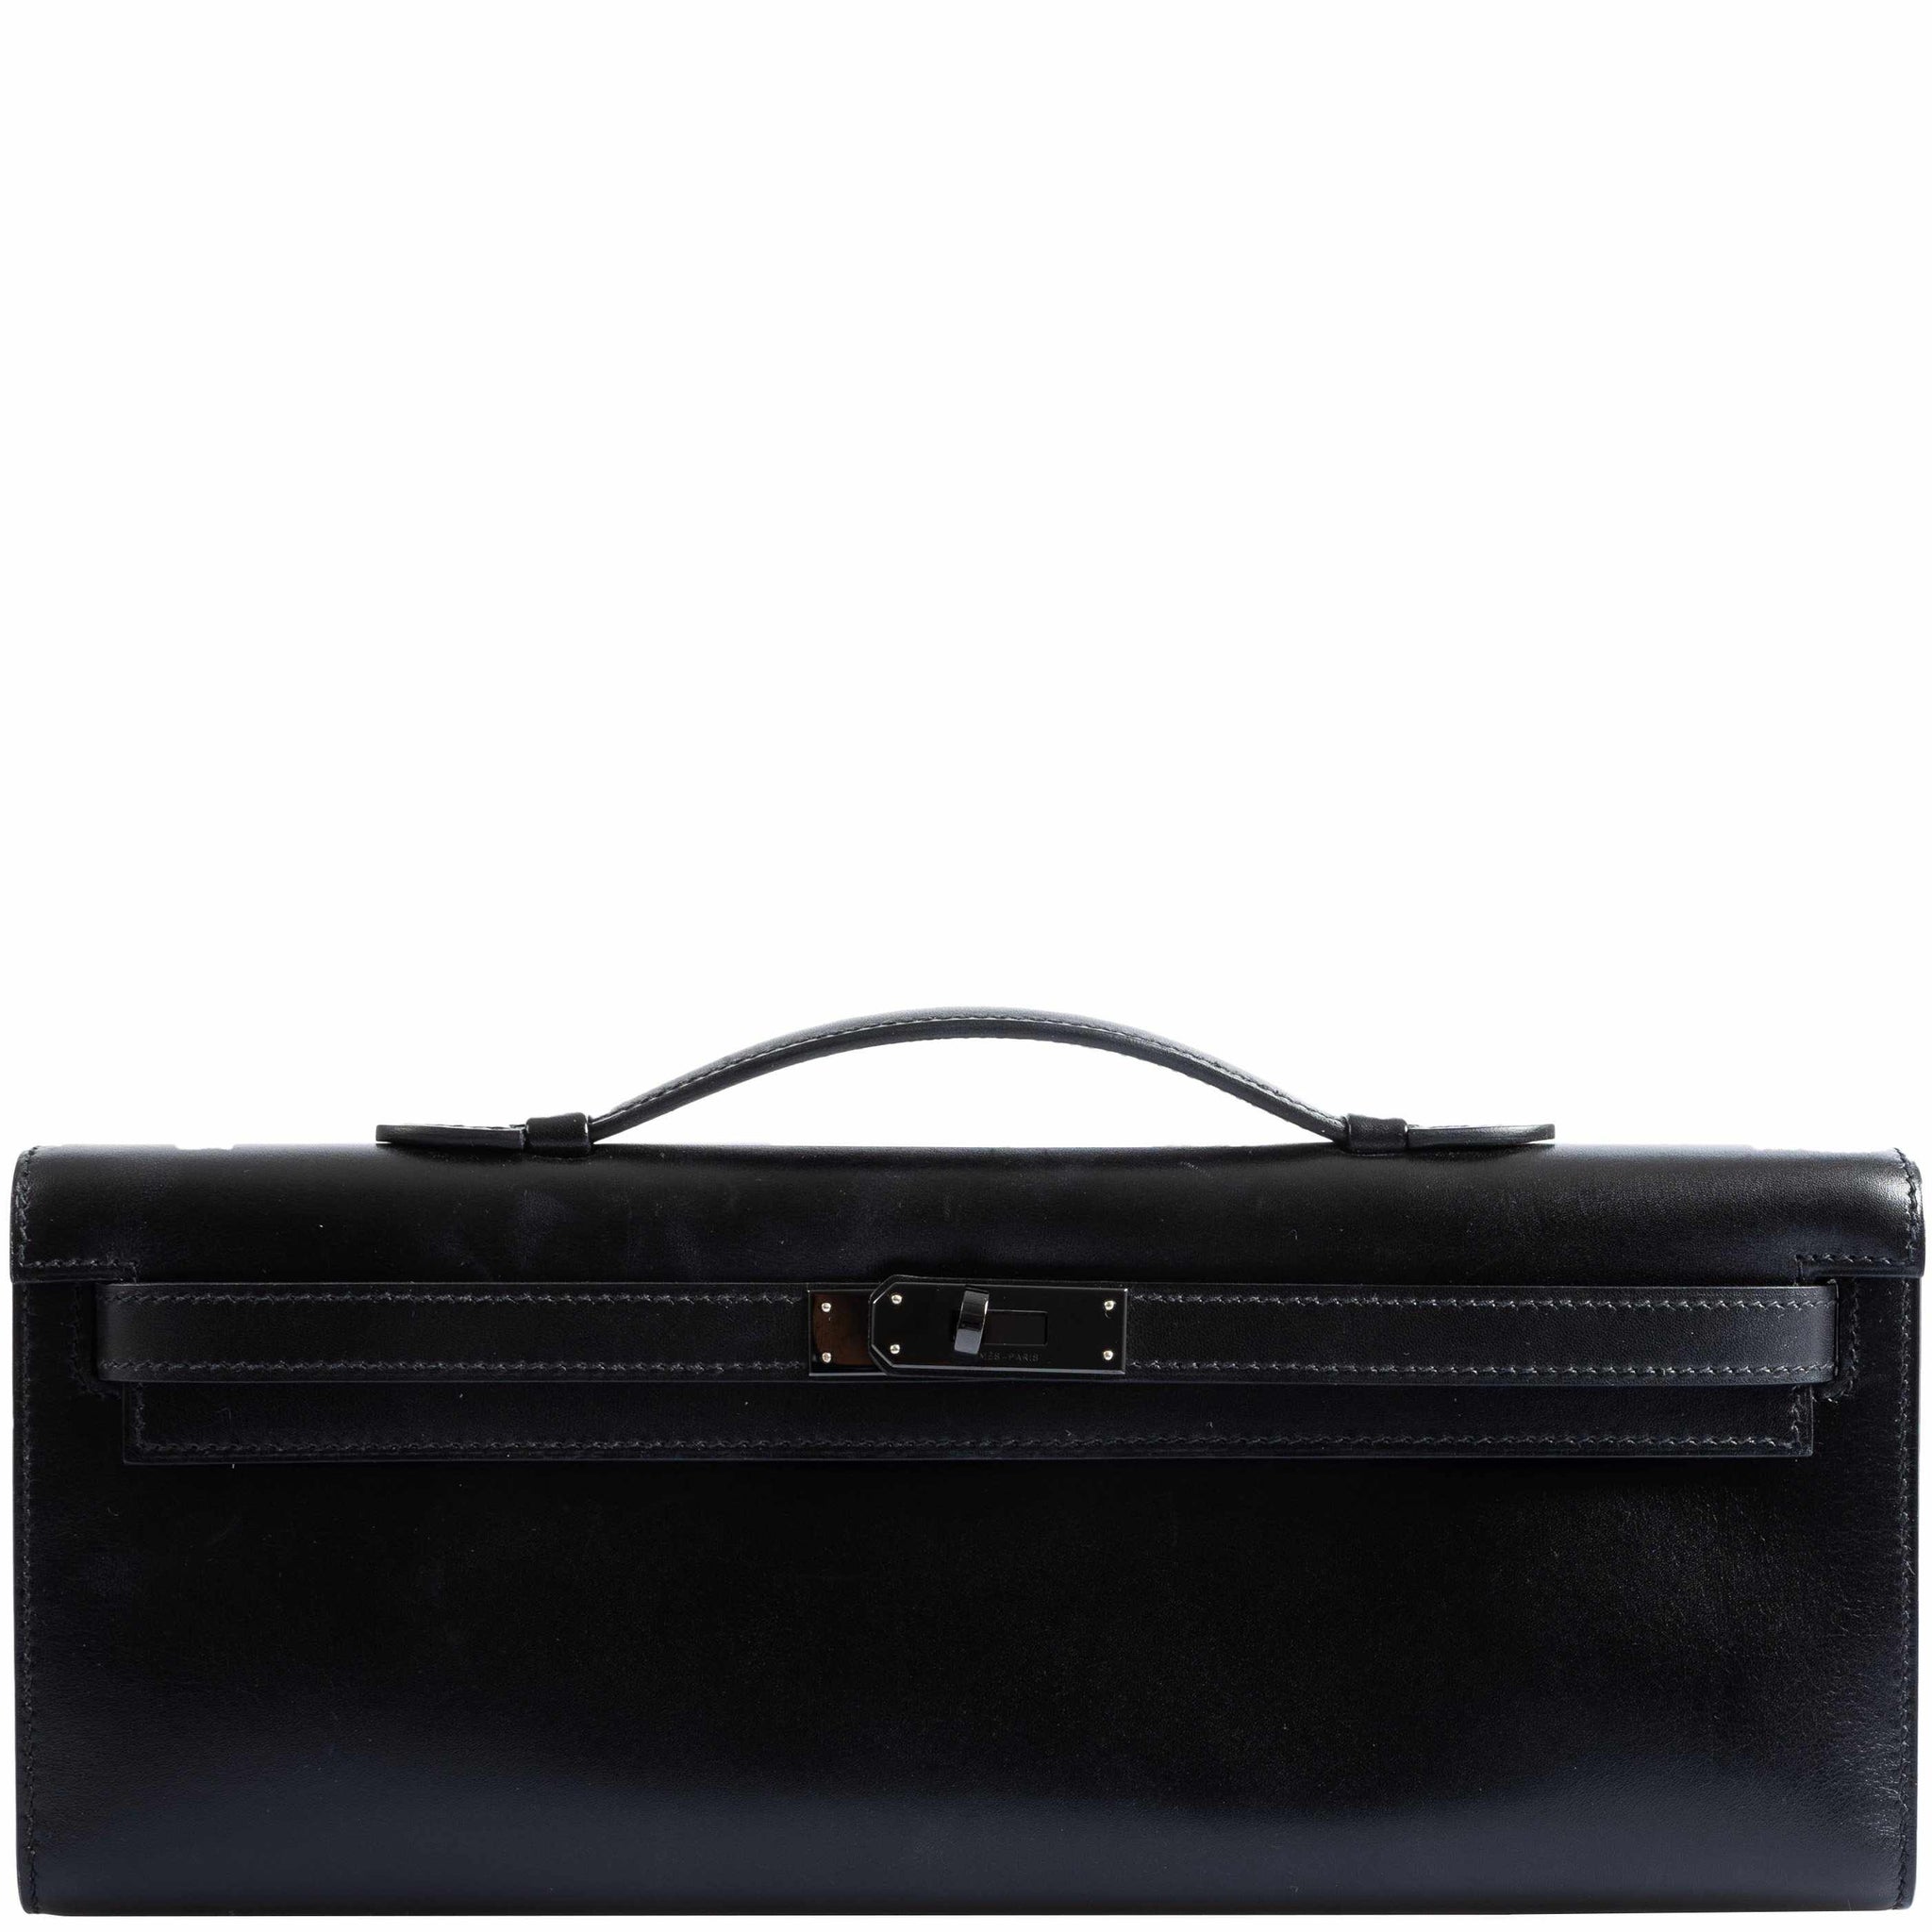 A BLACK CALF BOX LEATHER SELLIER KELLY 25 WITH PALLADIUM HARDWARE